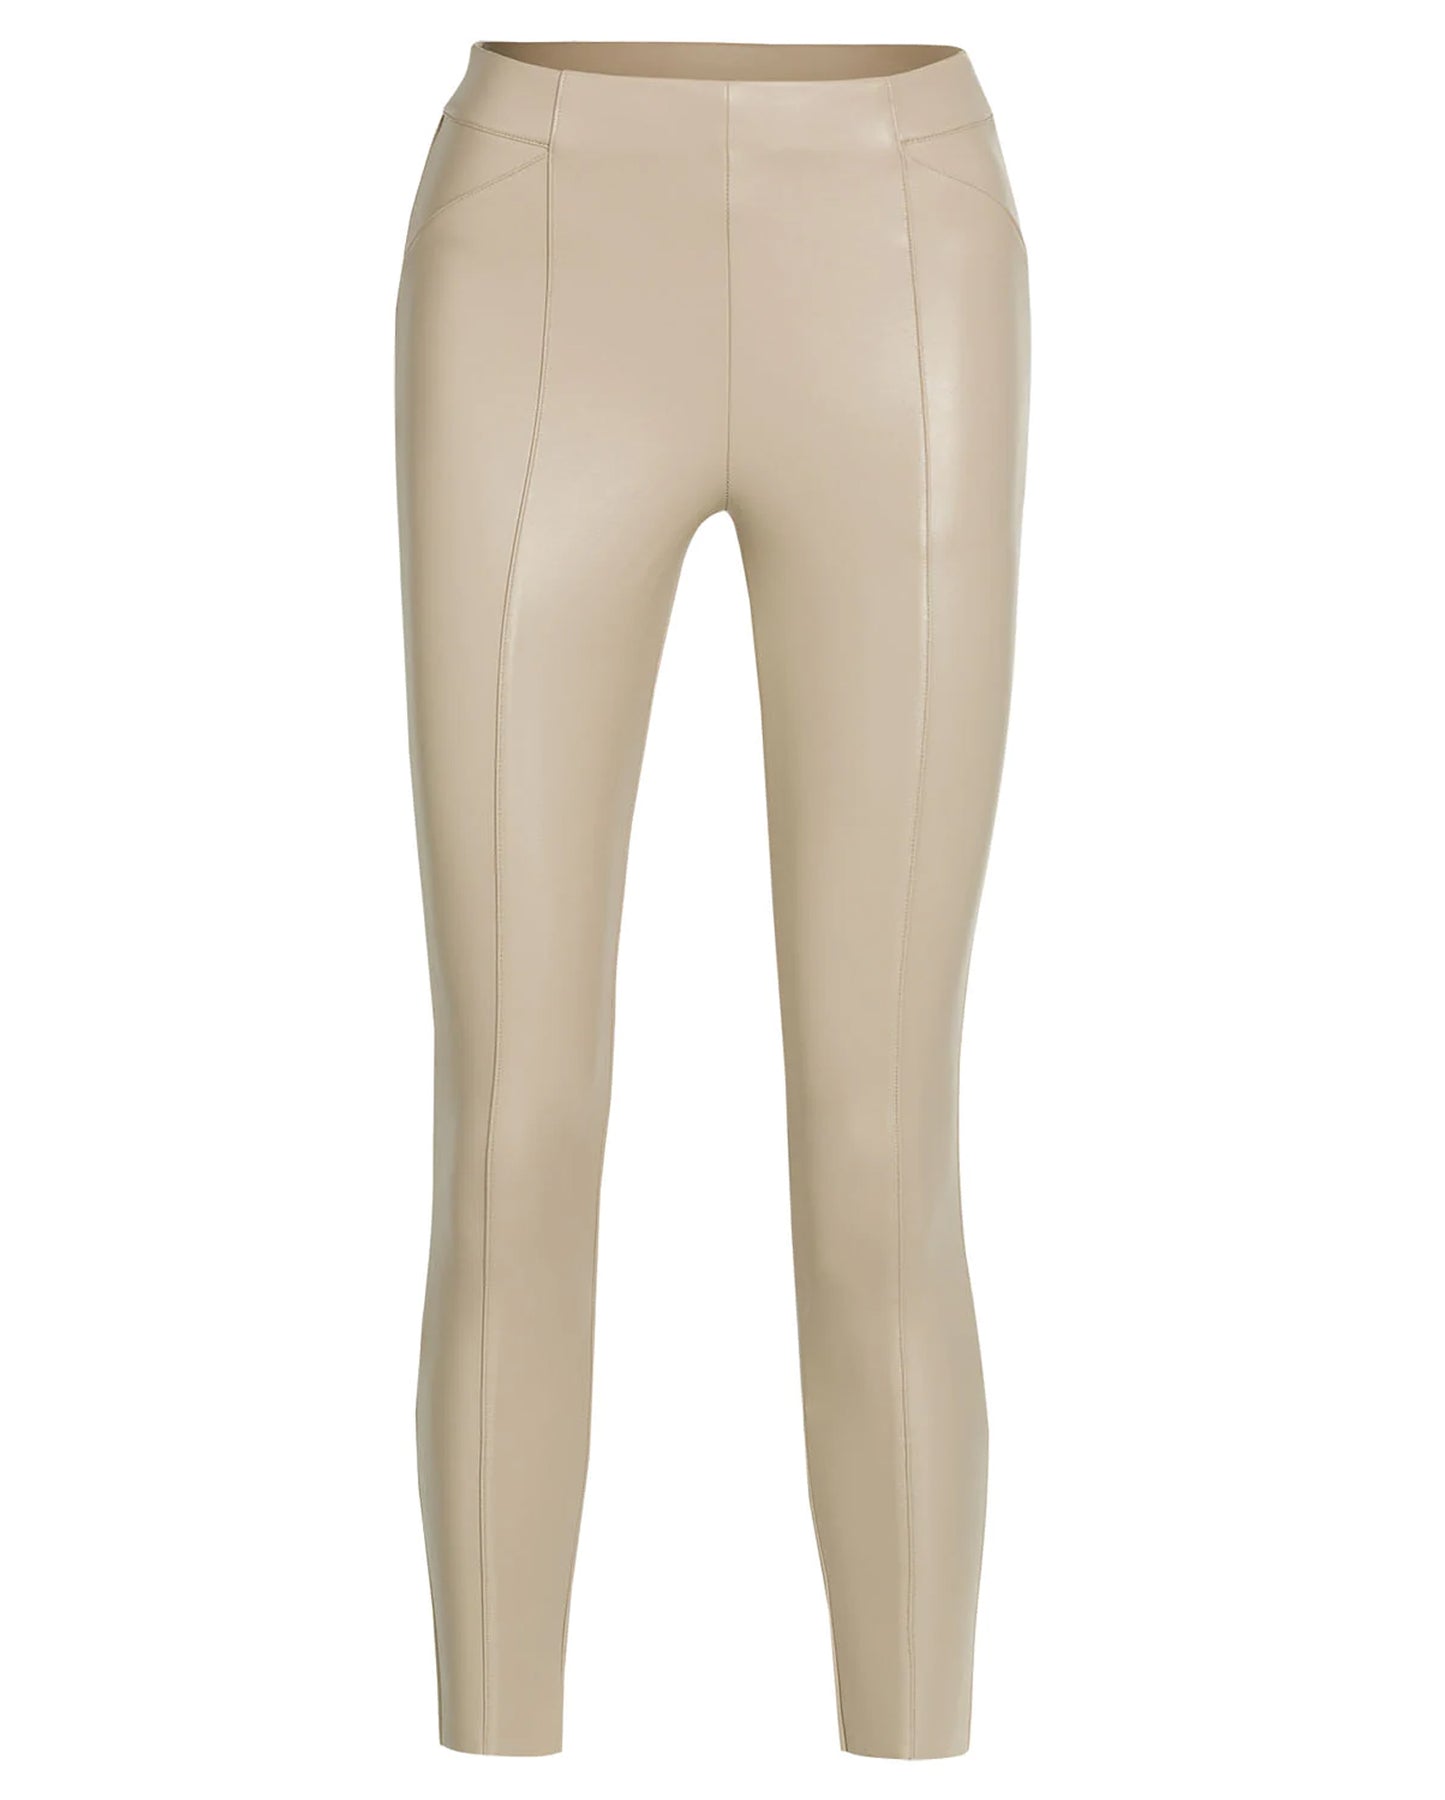 Ysabel Mora 70280 Leggings - Cream mid rise faux leather fleece lined trouser leggings with centre seam down the front of the legs, triangular panelling on the hips and darts at the back to ensure a snug fit.